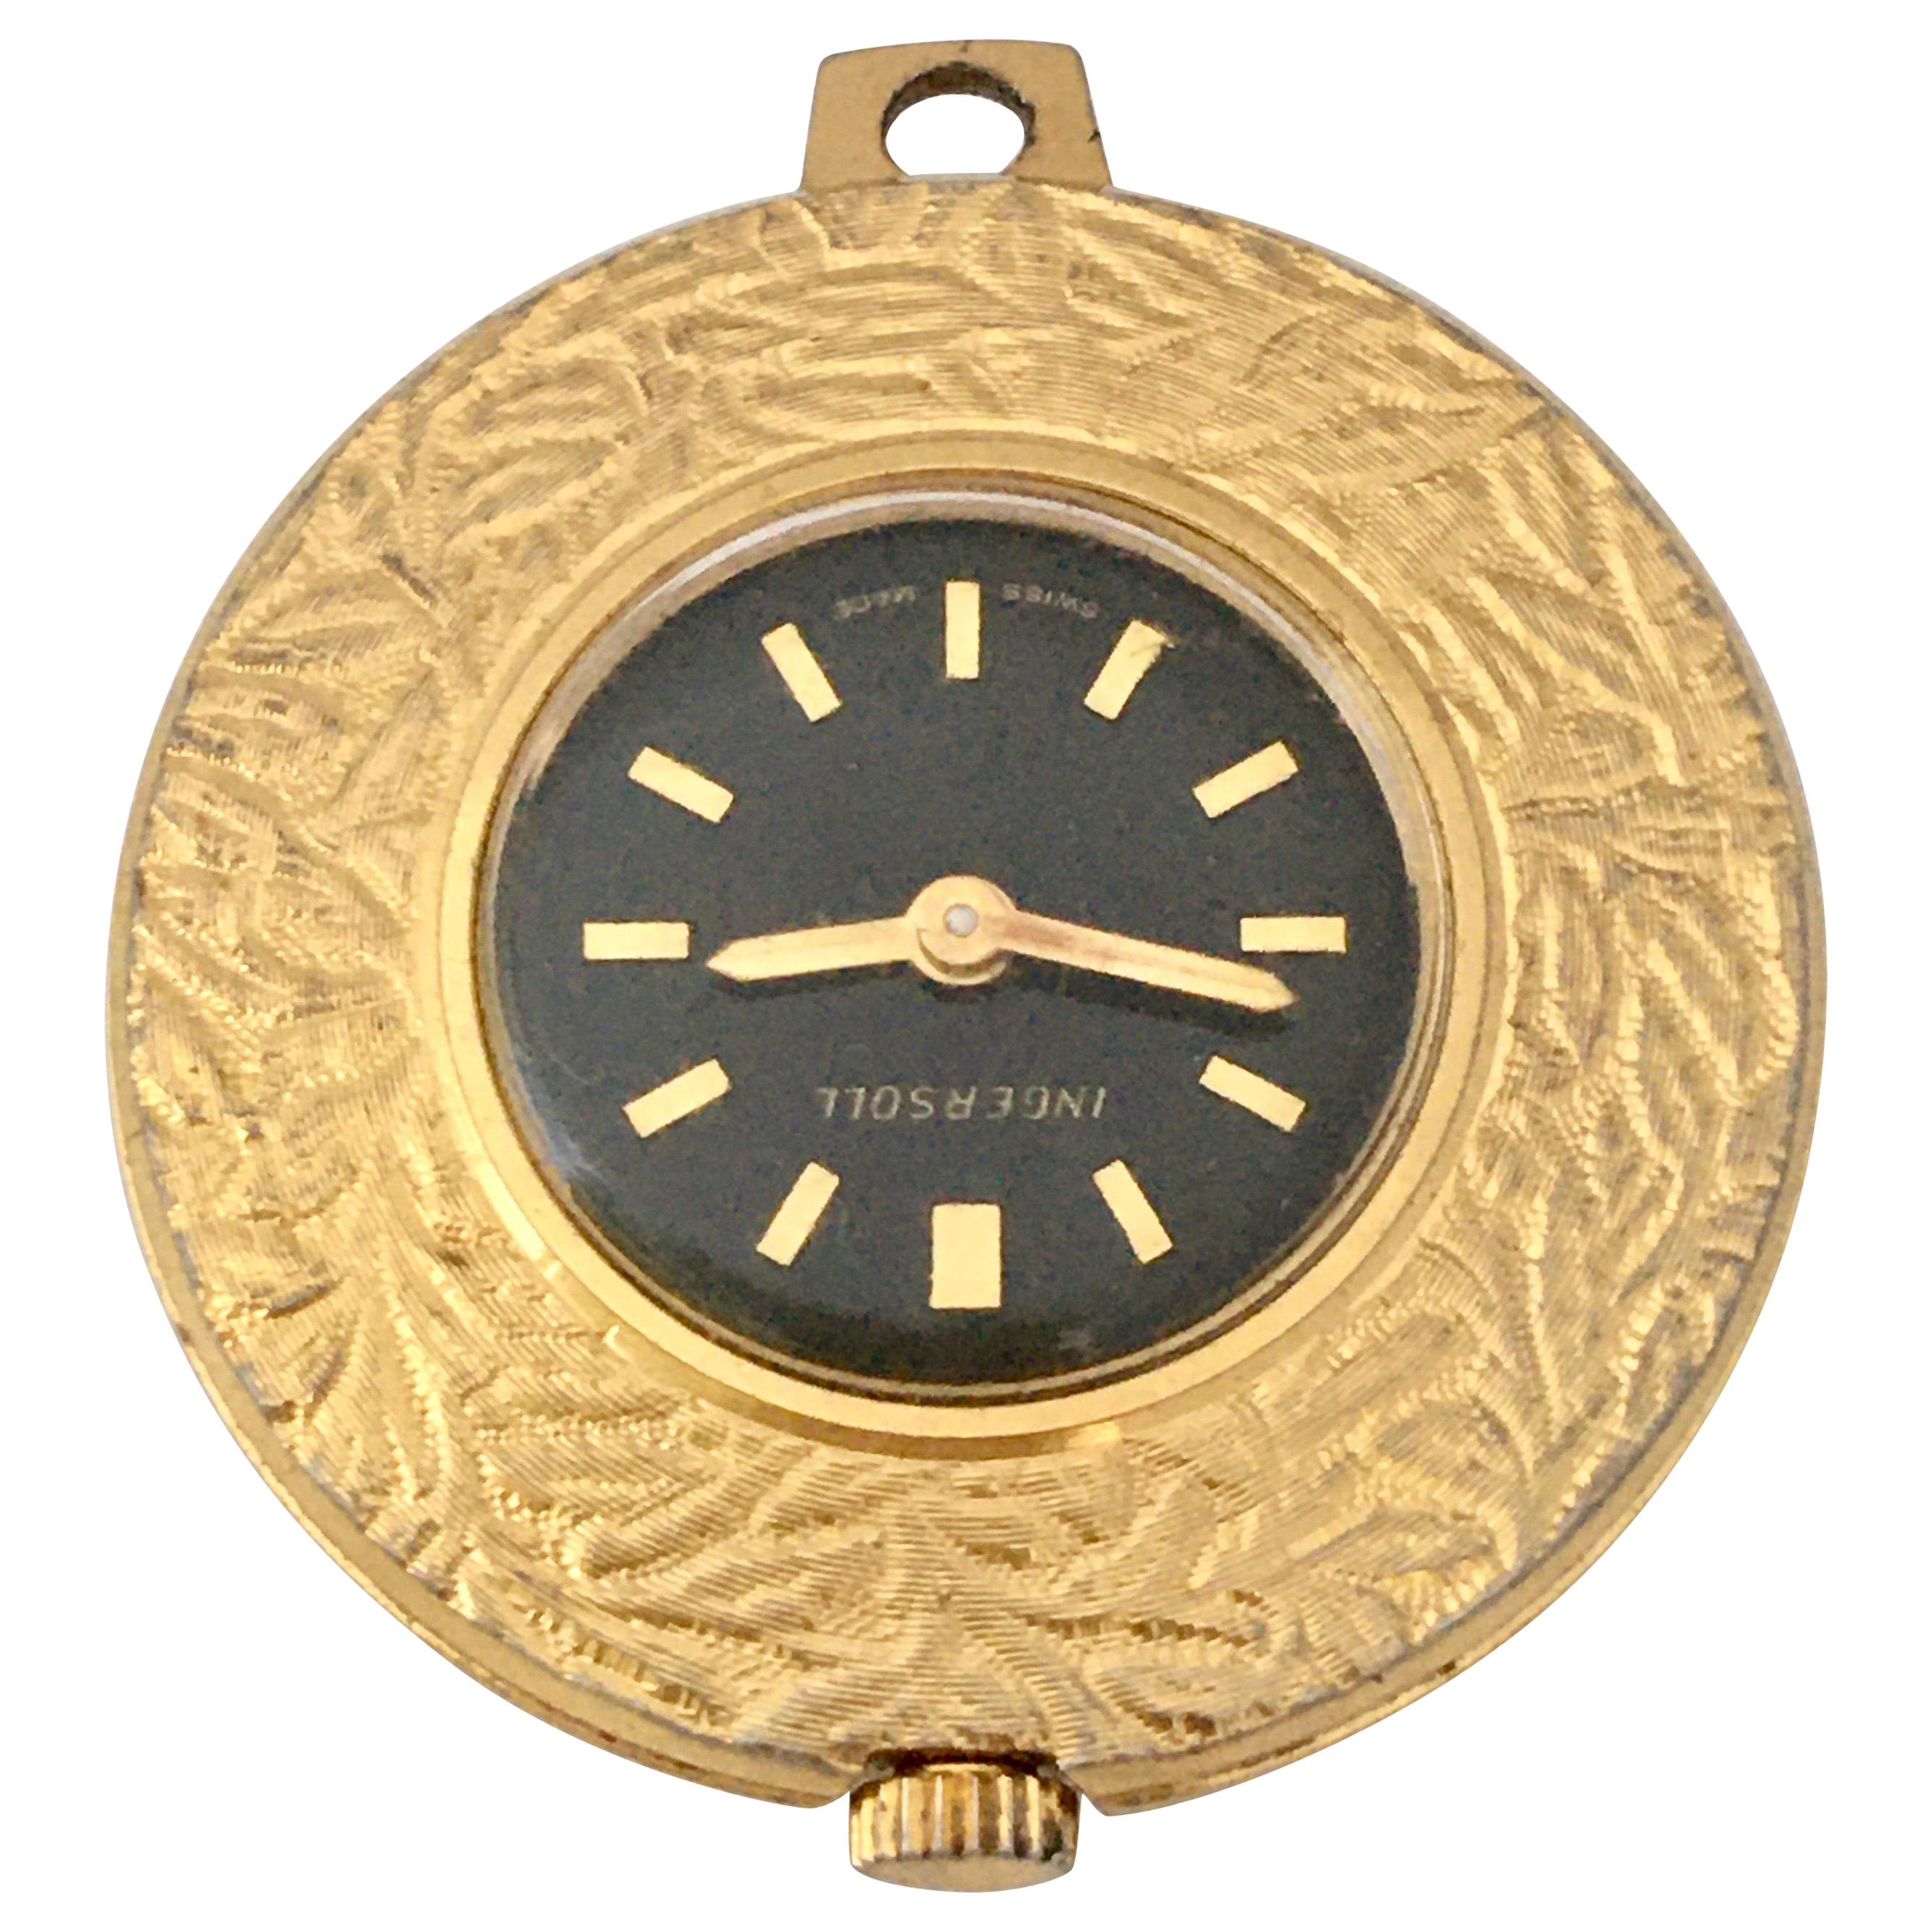 Vintage Gold-Plated Ingersoll Manual Winding Pendant Watch